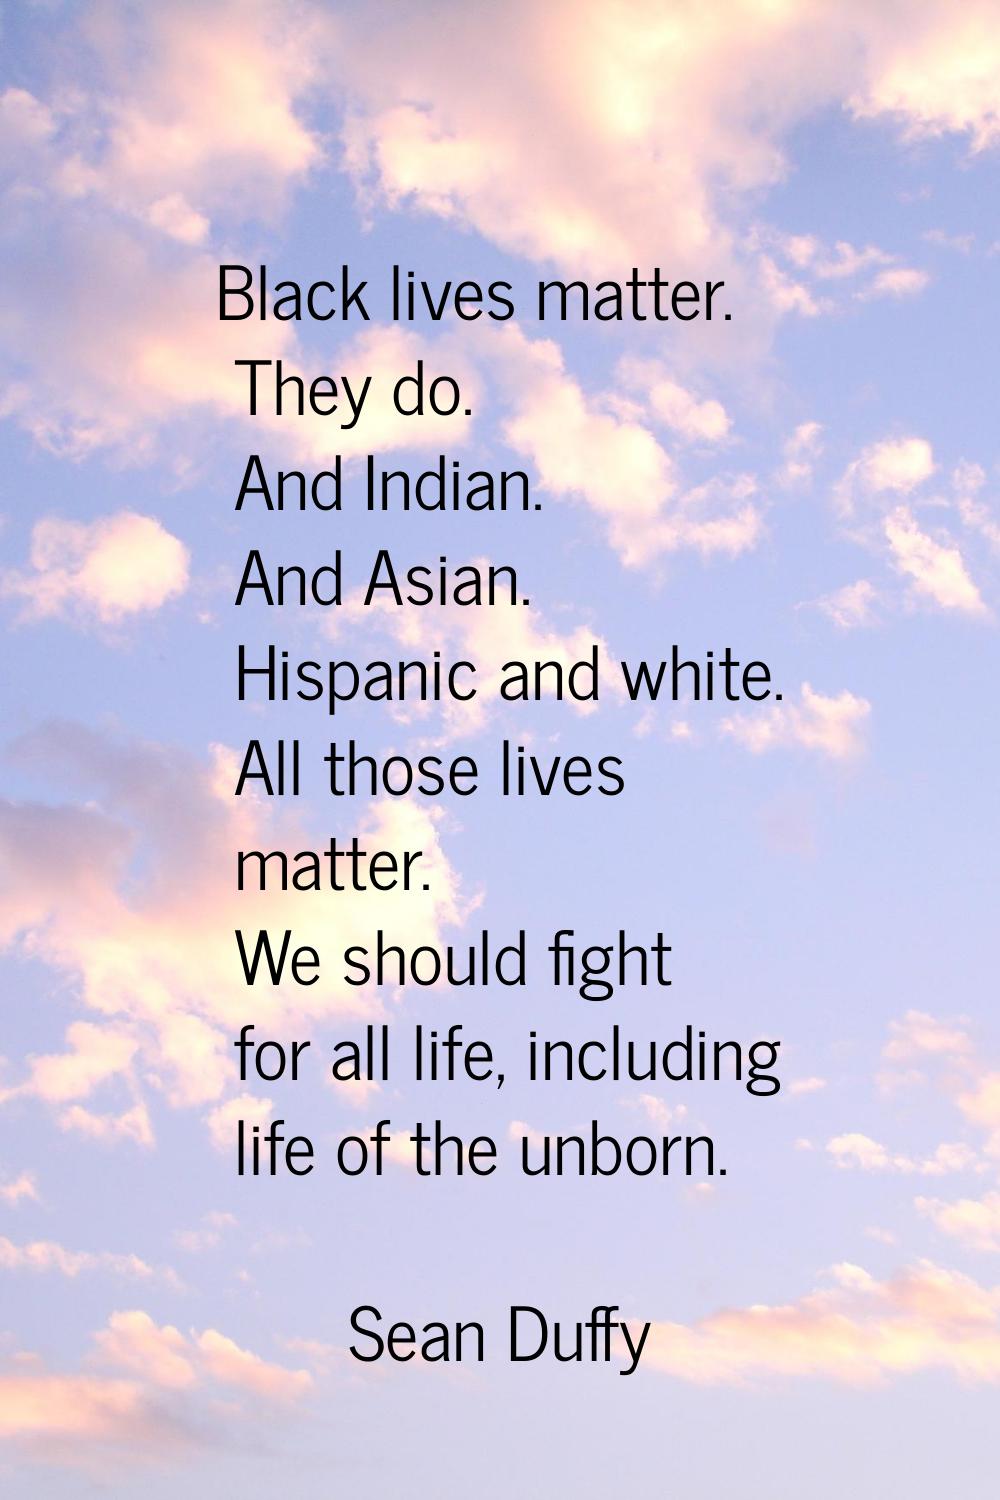 Black lives matter. They do. And Indian. And Asian. Hispanic and white. All those lives matter. We 